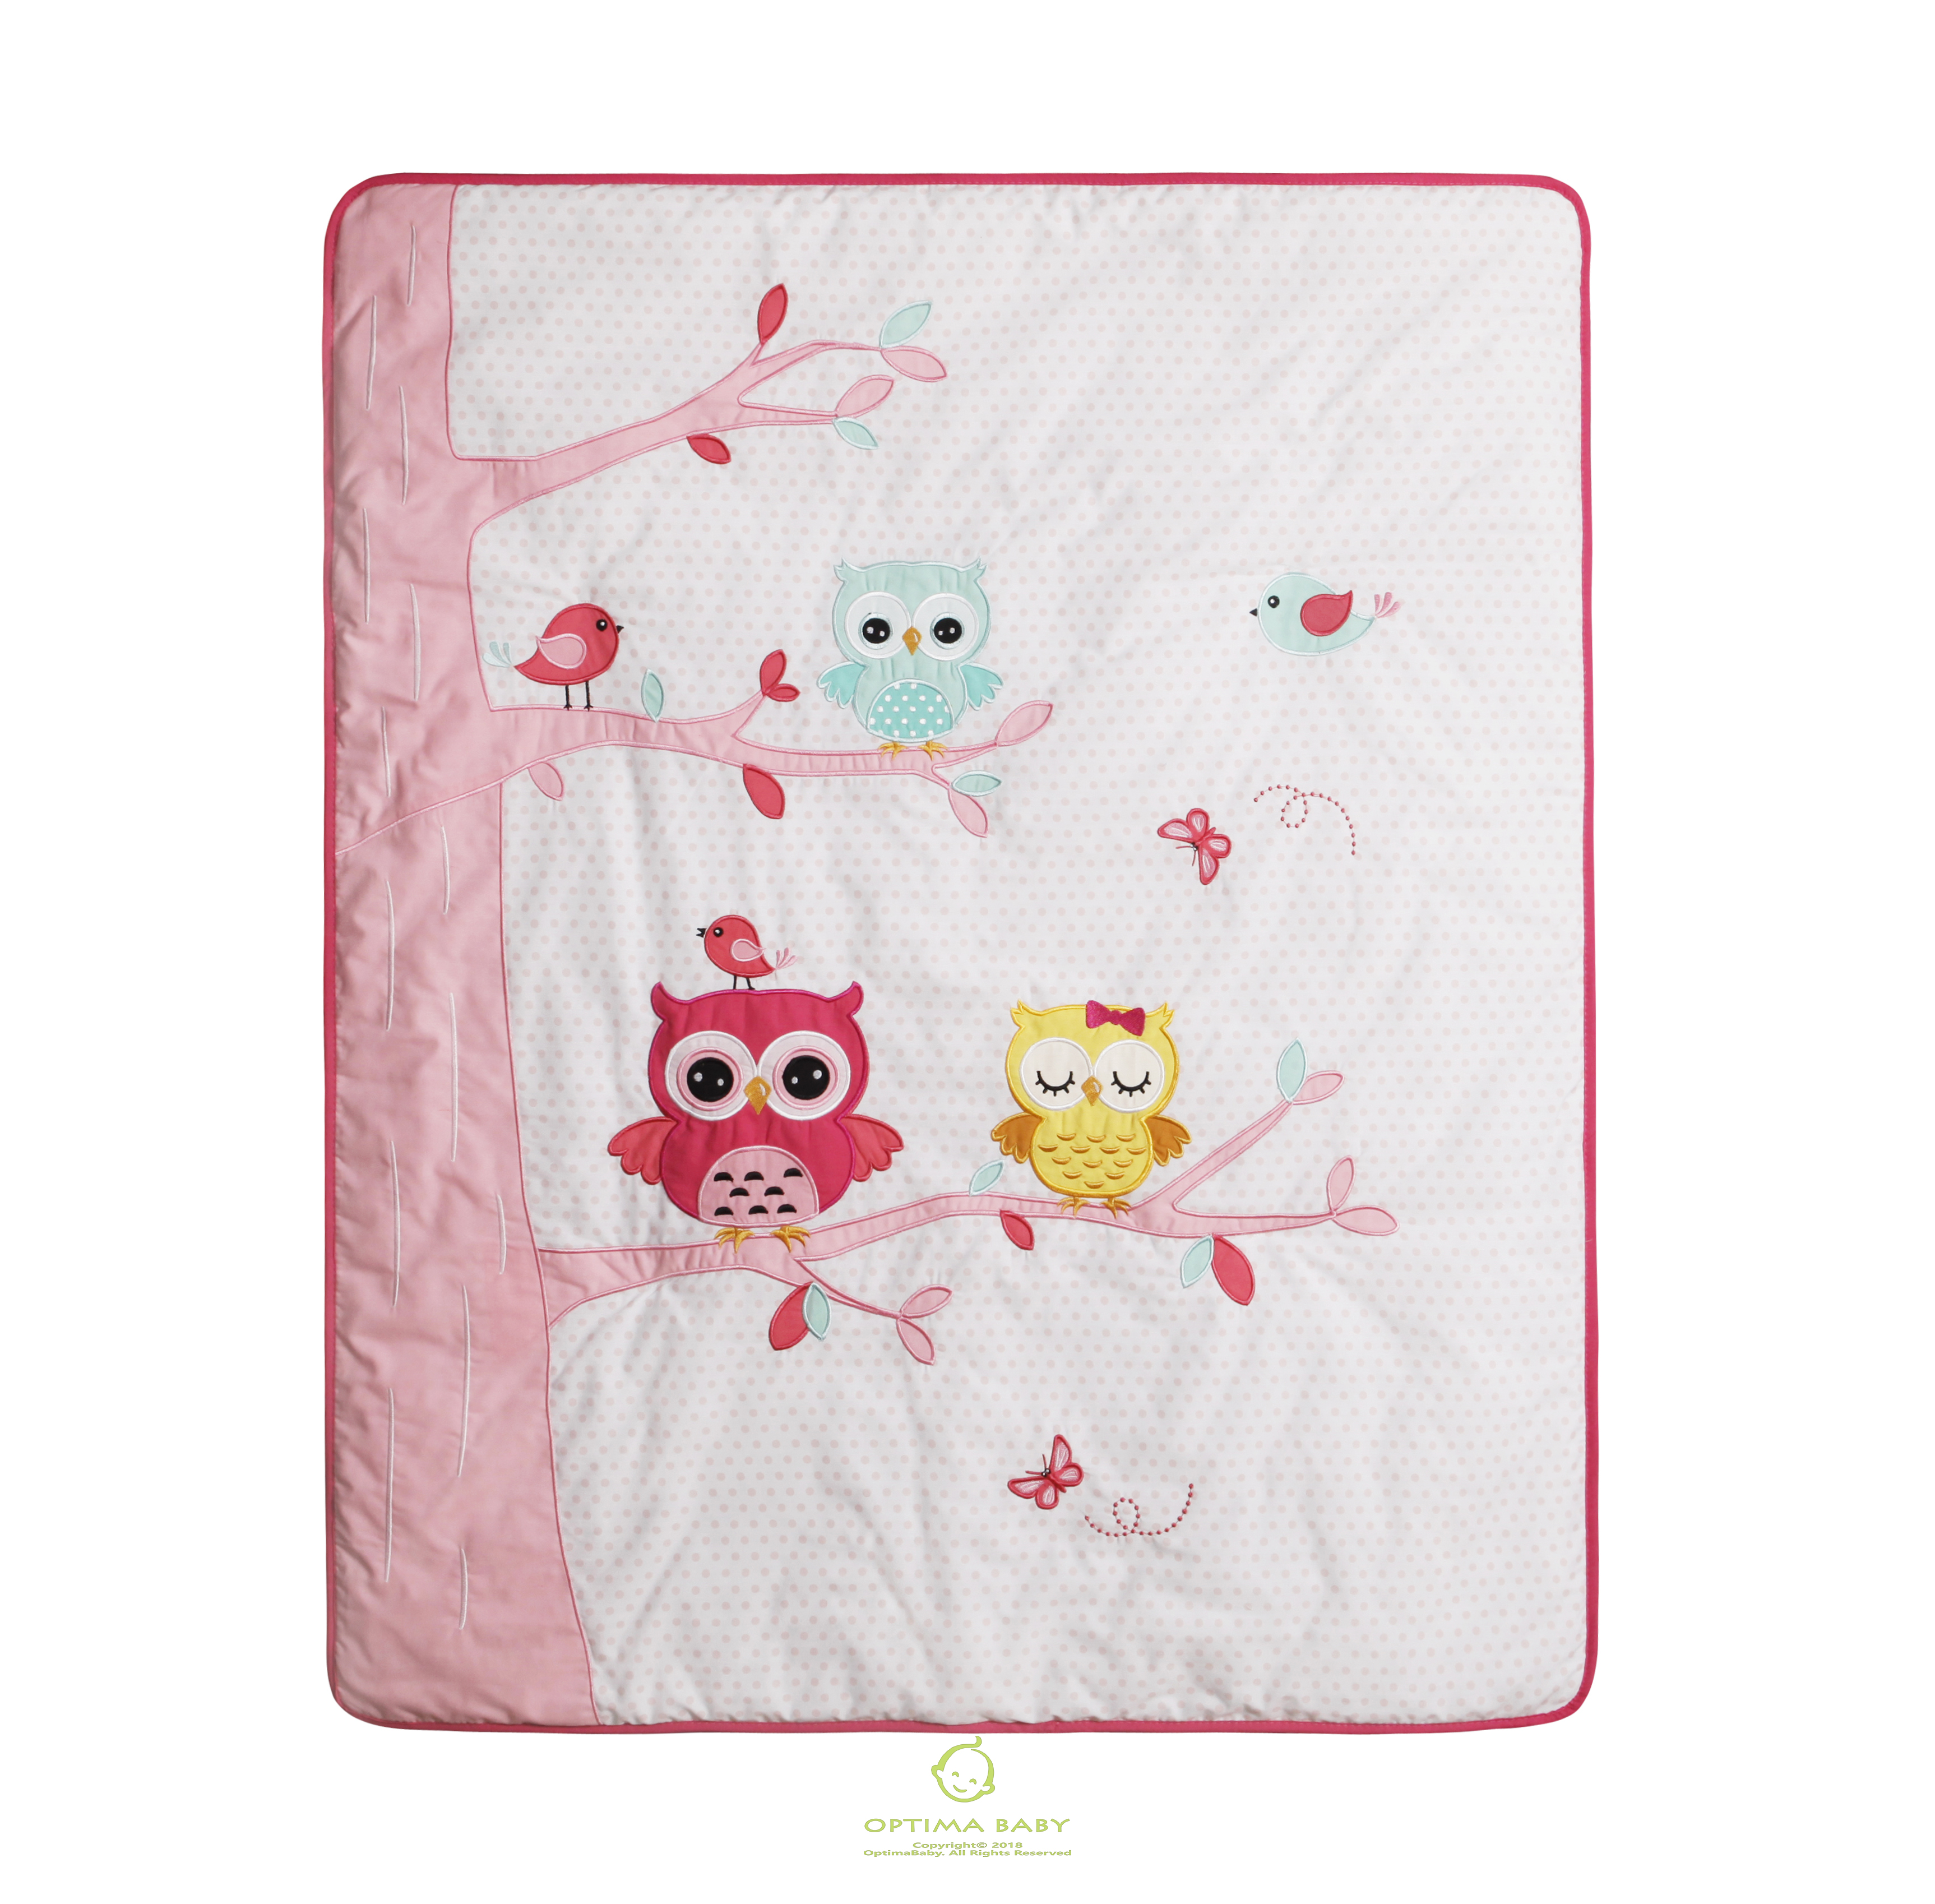 Bumperless 5 pieces Optimababy Owls Baby Bedding Set - image 3 of 4